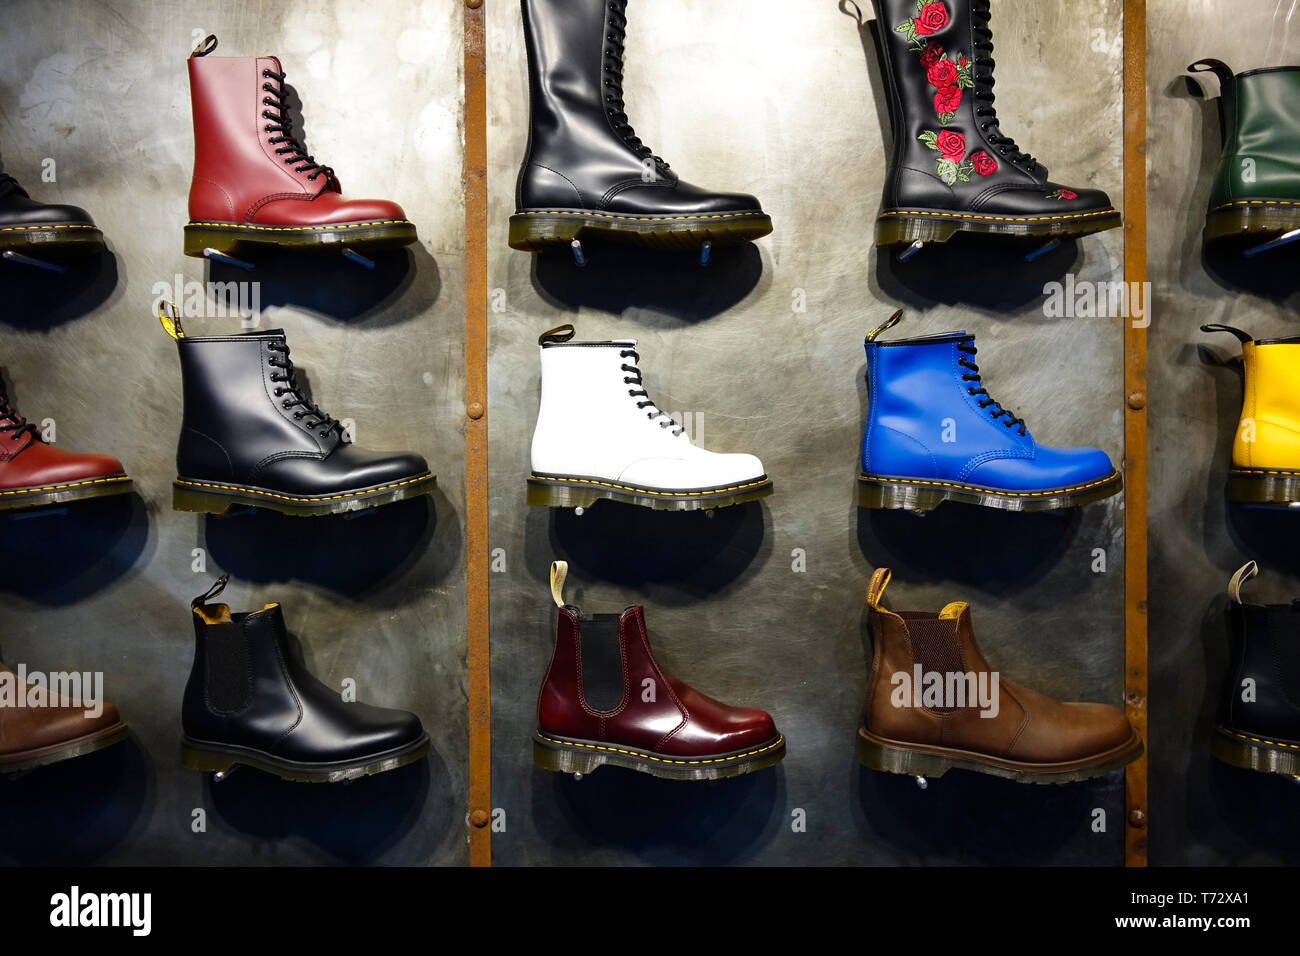 Window display of colourful Dr Marten boots Stock Photo